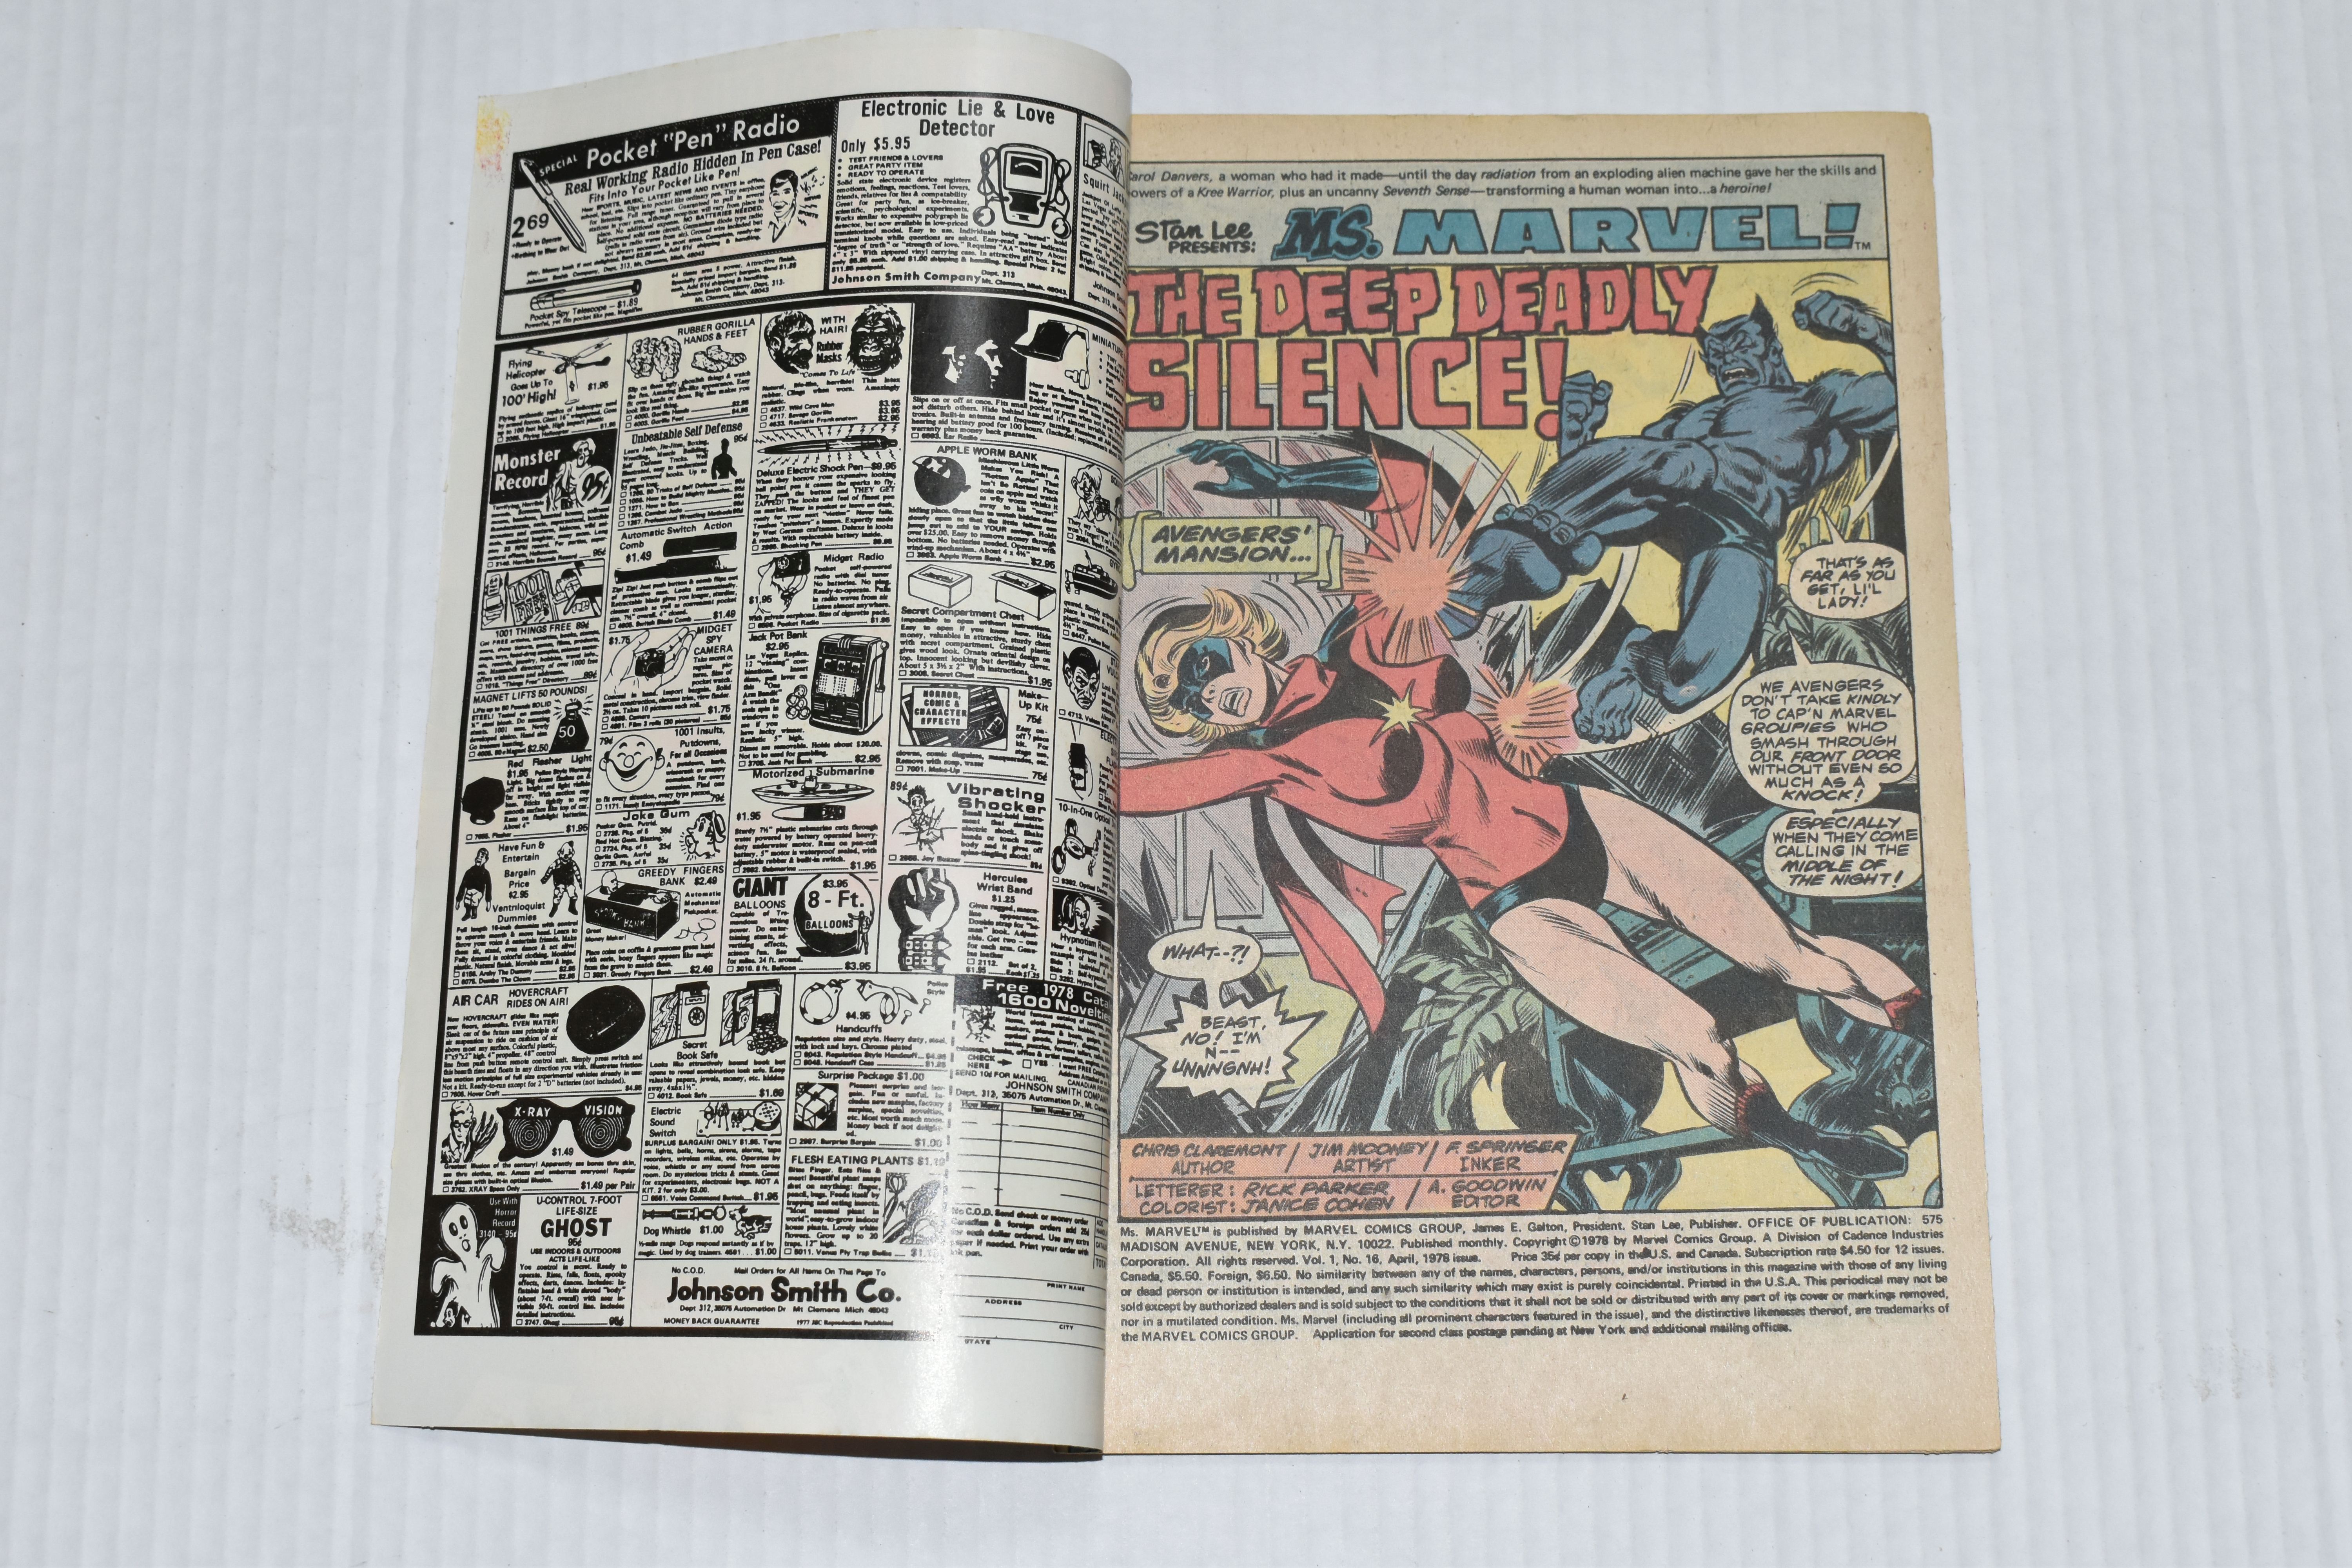 MS. MARVEL NOS. 16 & 18 MARVEL COMICS, first appearance of Mystique, comics show signs of wear, - Image 6 of 8